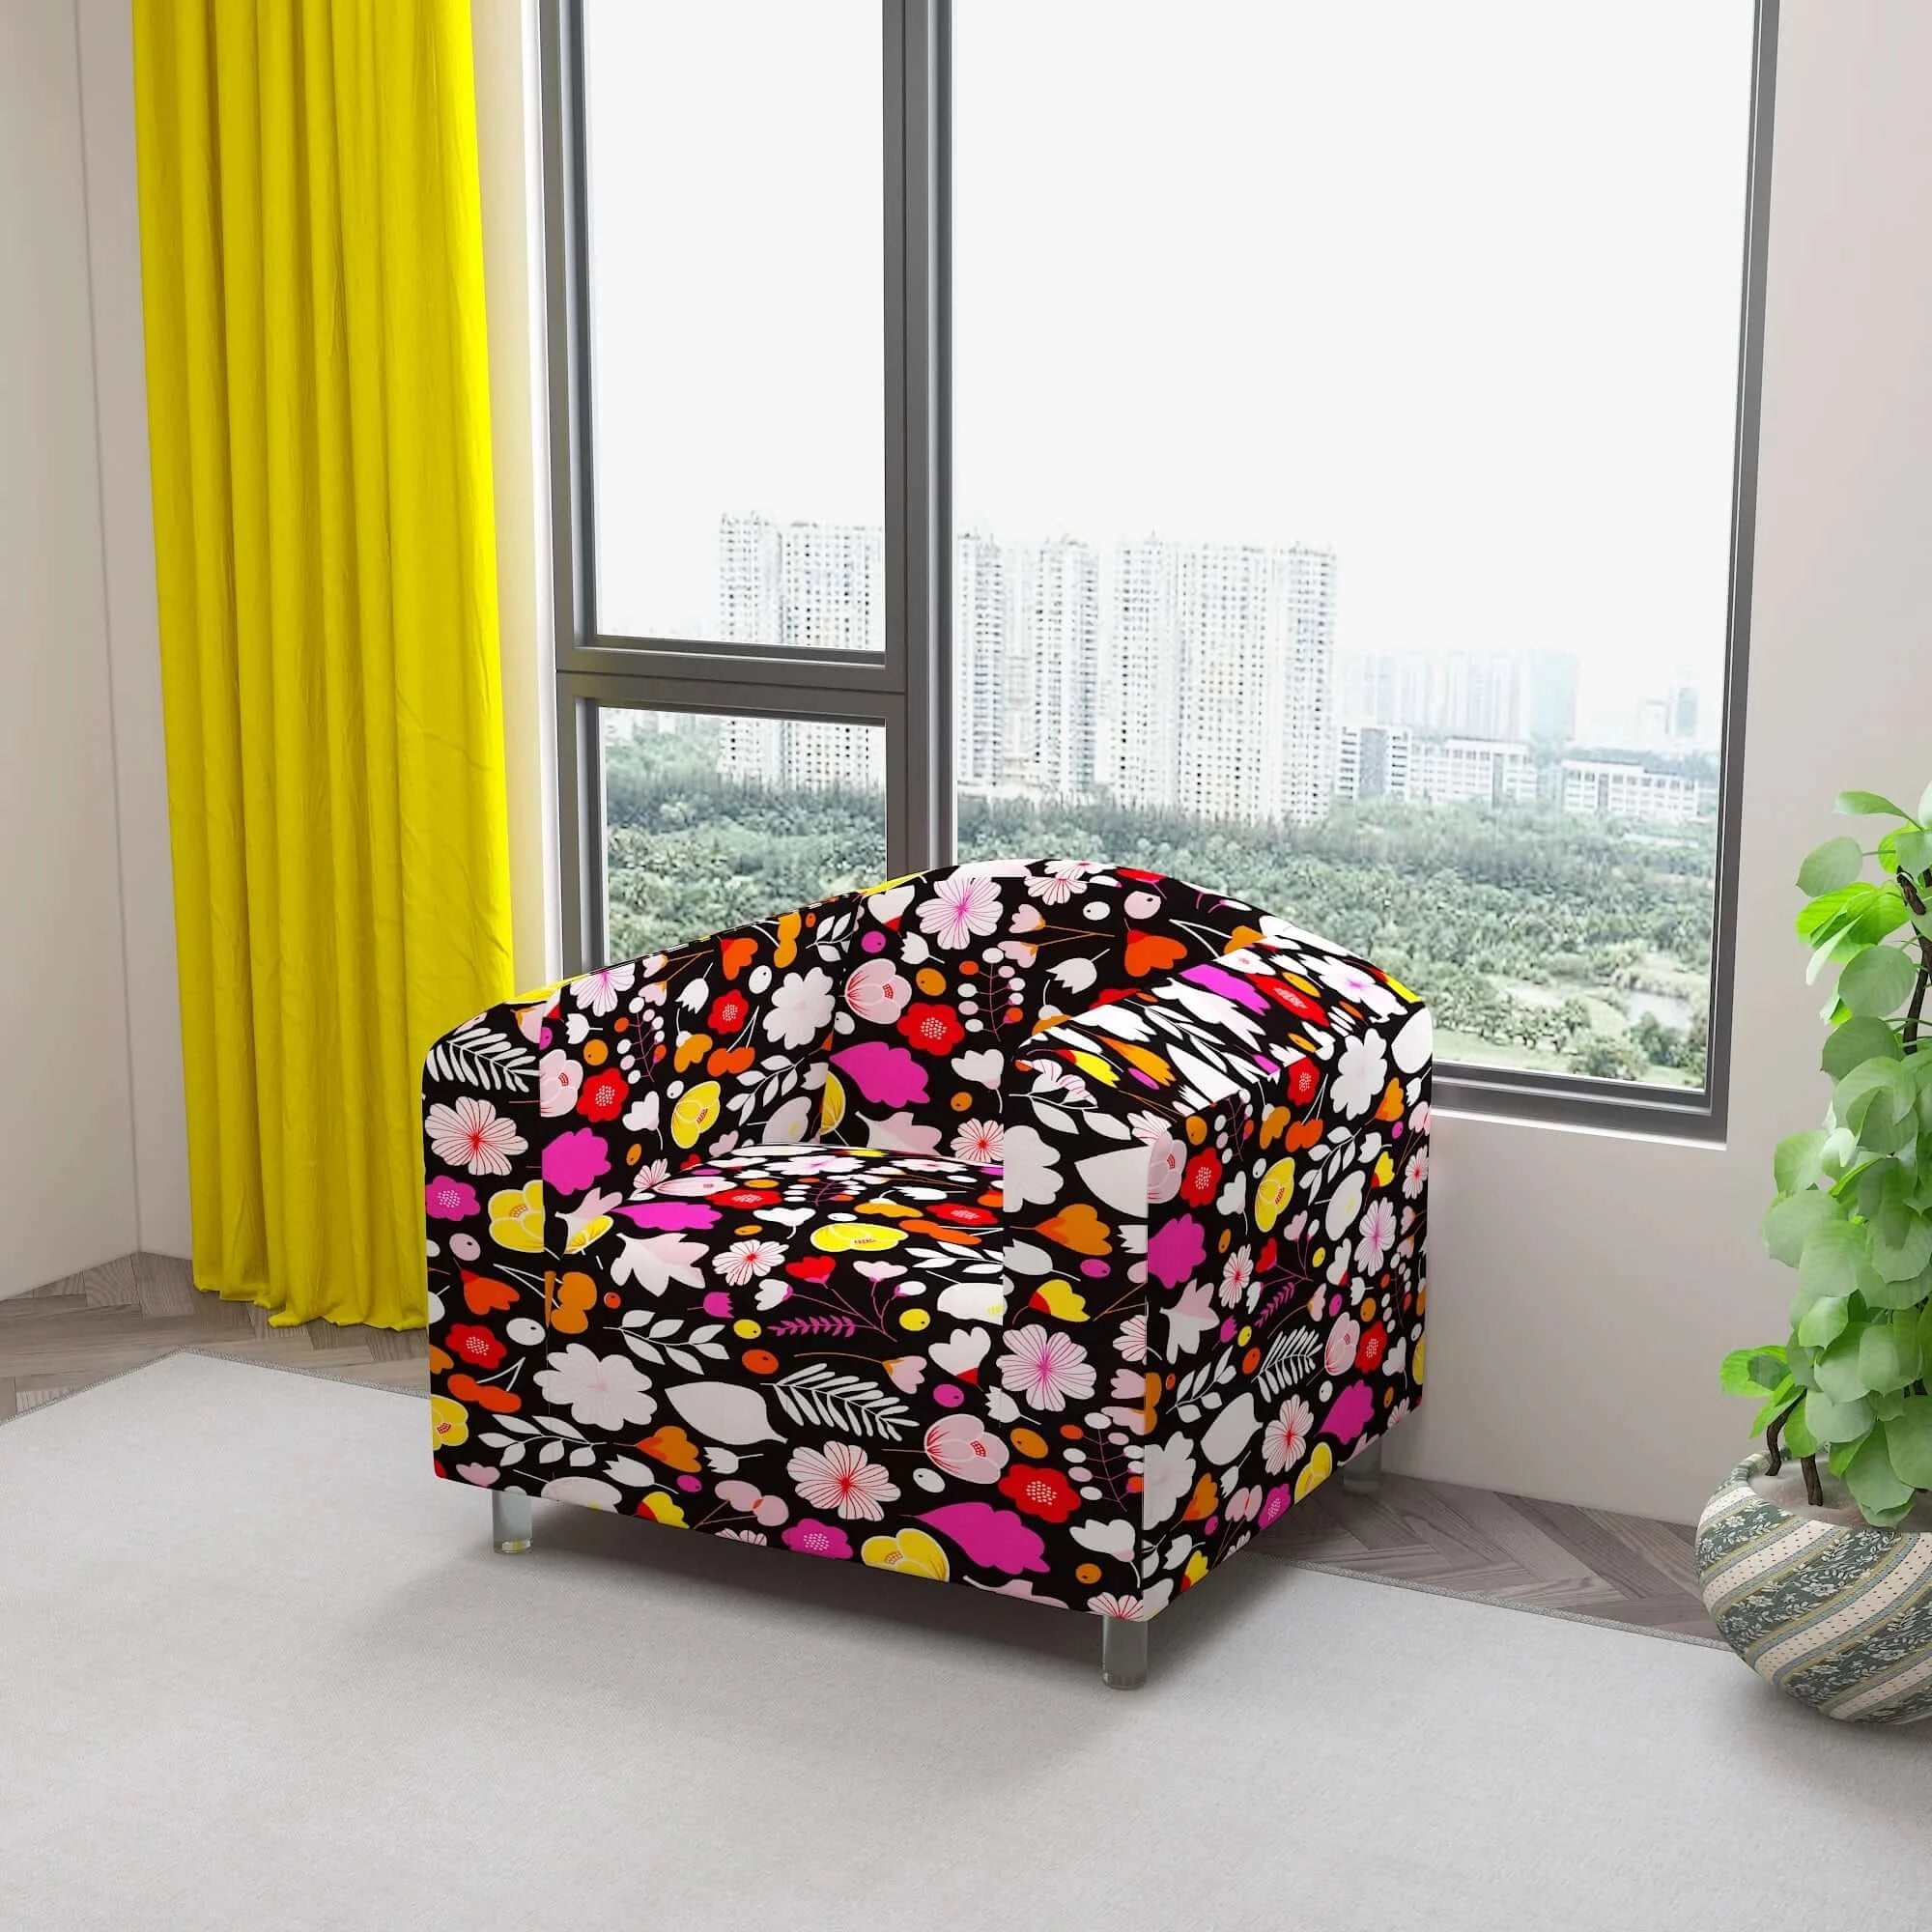 Marigold Printed Sofa Protector Cover Full Stretchable, MG04 - Dream Care Furnishings Private Limited